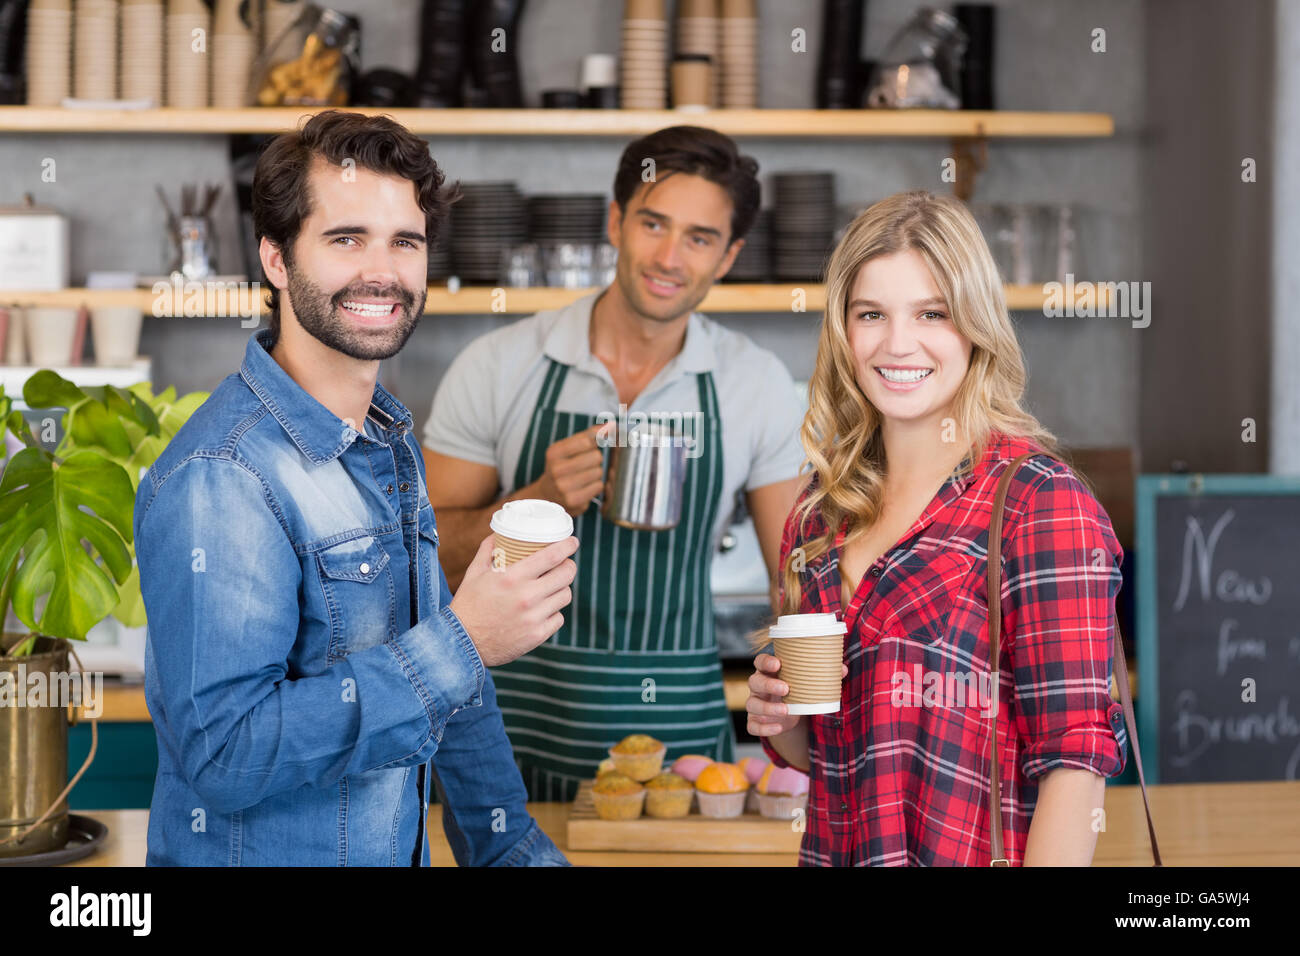 Portrait of smiling couple standing at counter holding cup of coffee Stock Photo